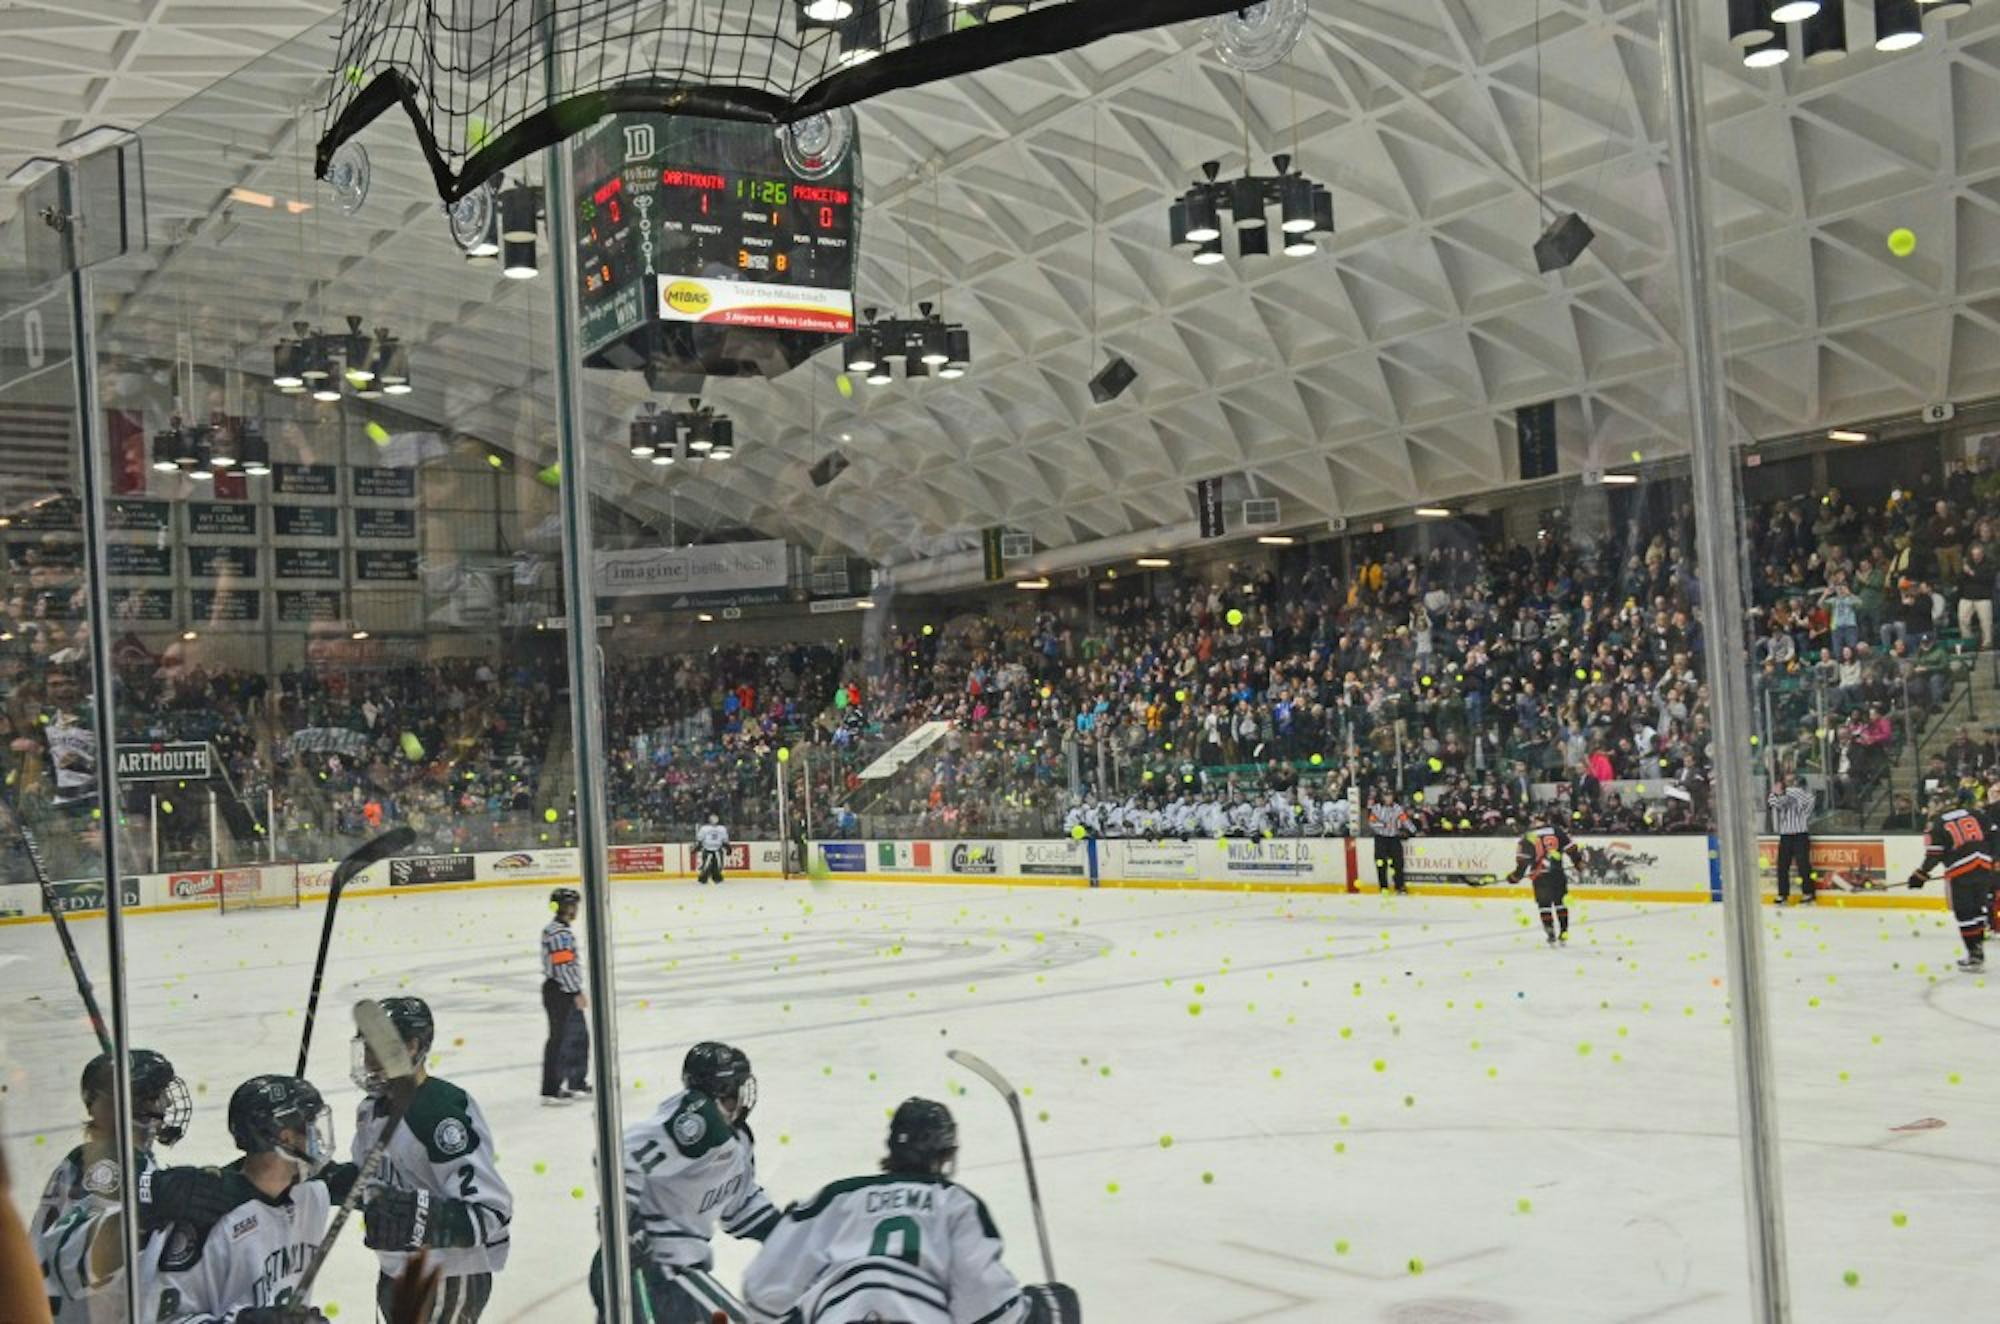 Tennis balls fly after the first goal at the Dartmouth men's hockey game against Princeton on Saturday.